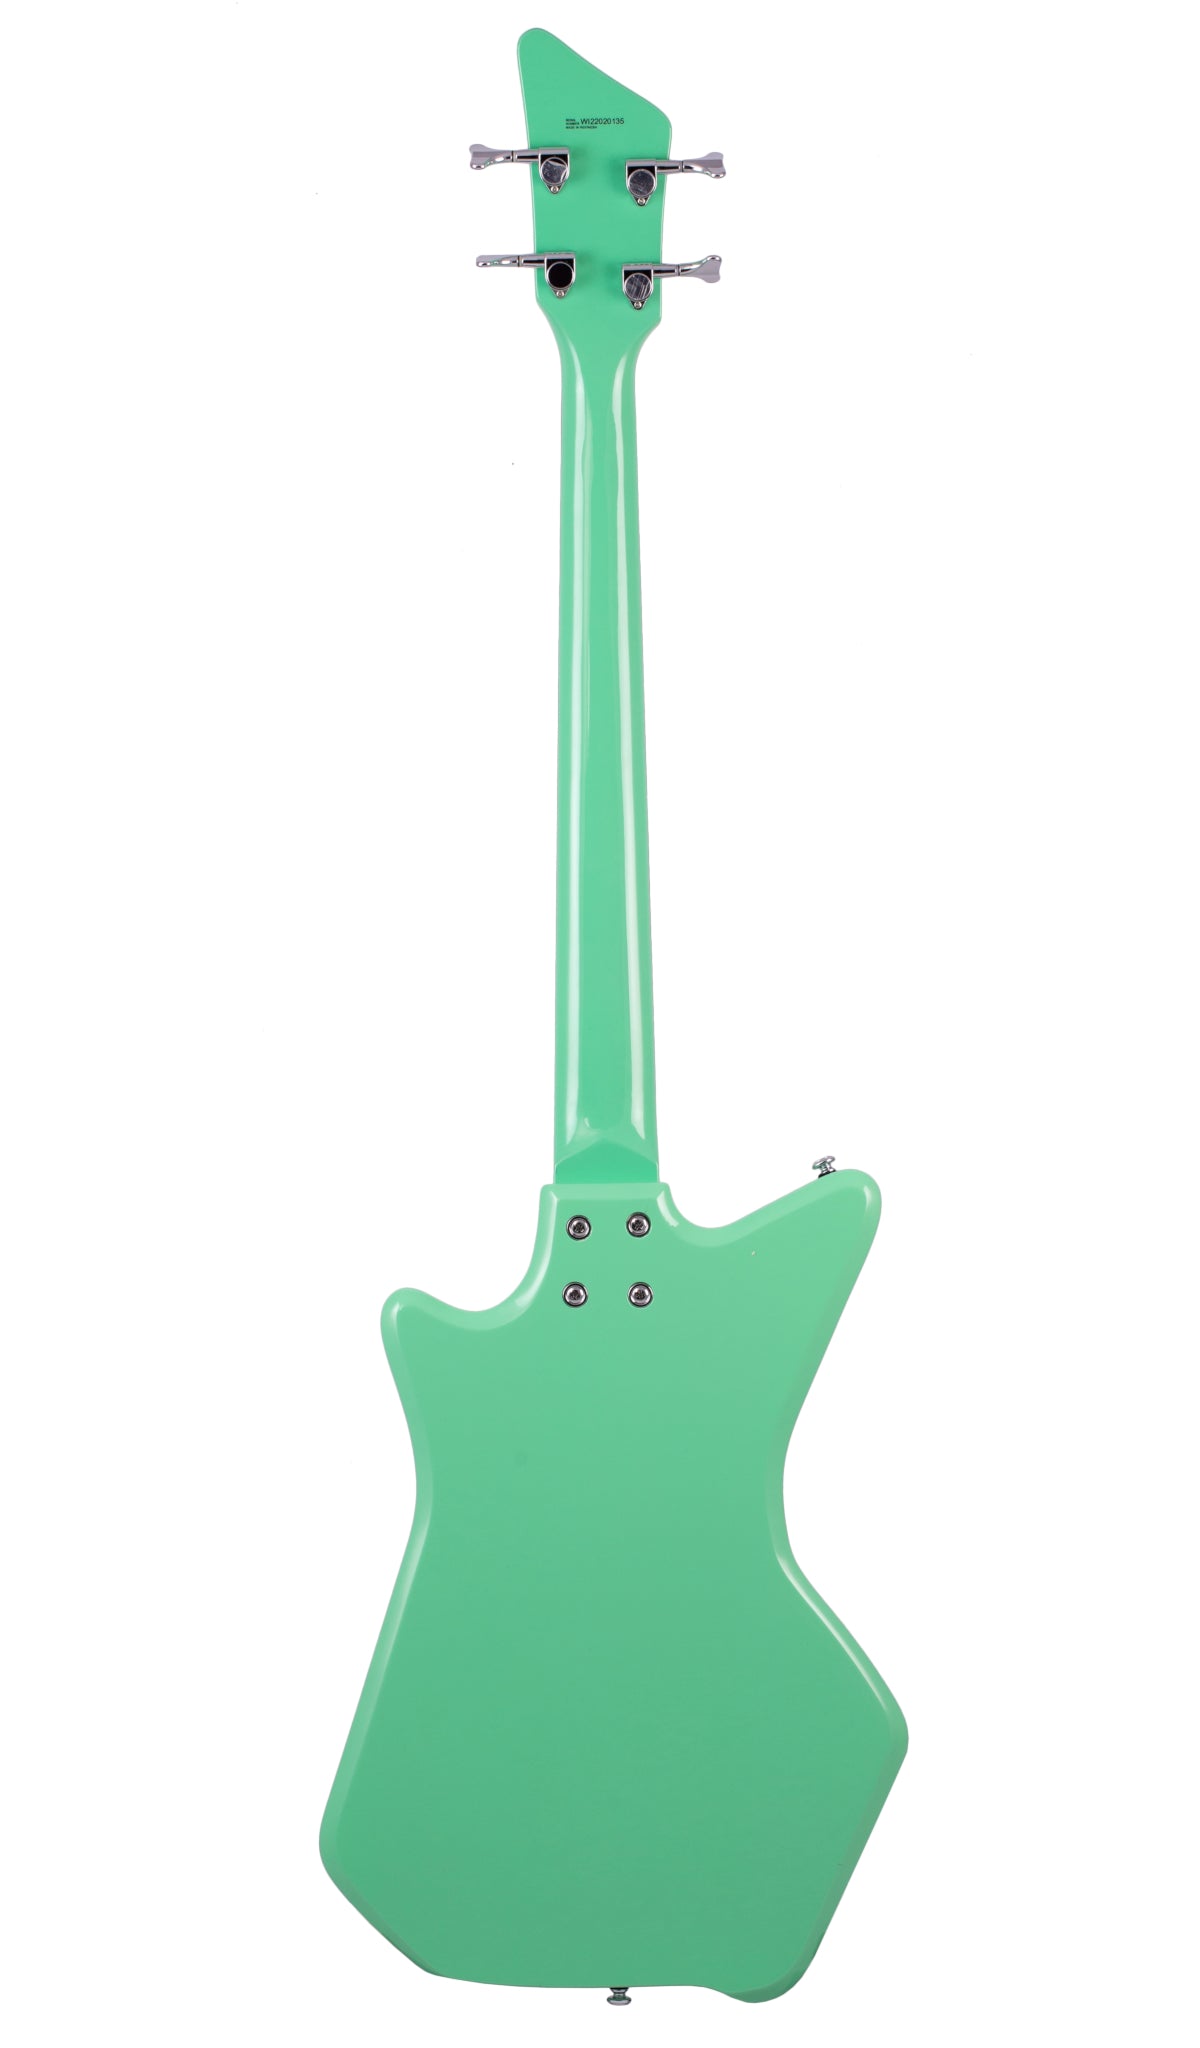 Eastwood Guitars Airline Jetsons JR Bass Red #color_seafoam-green